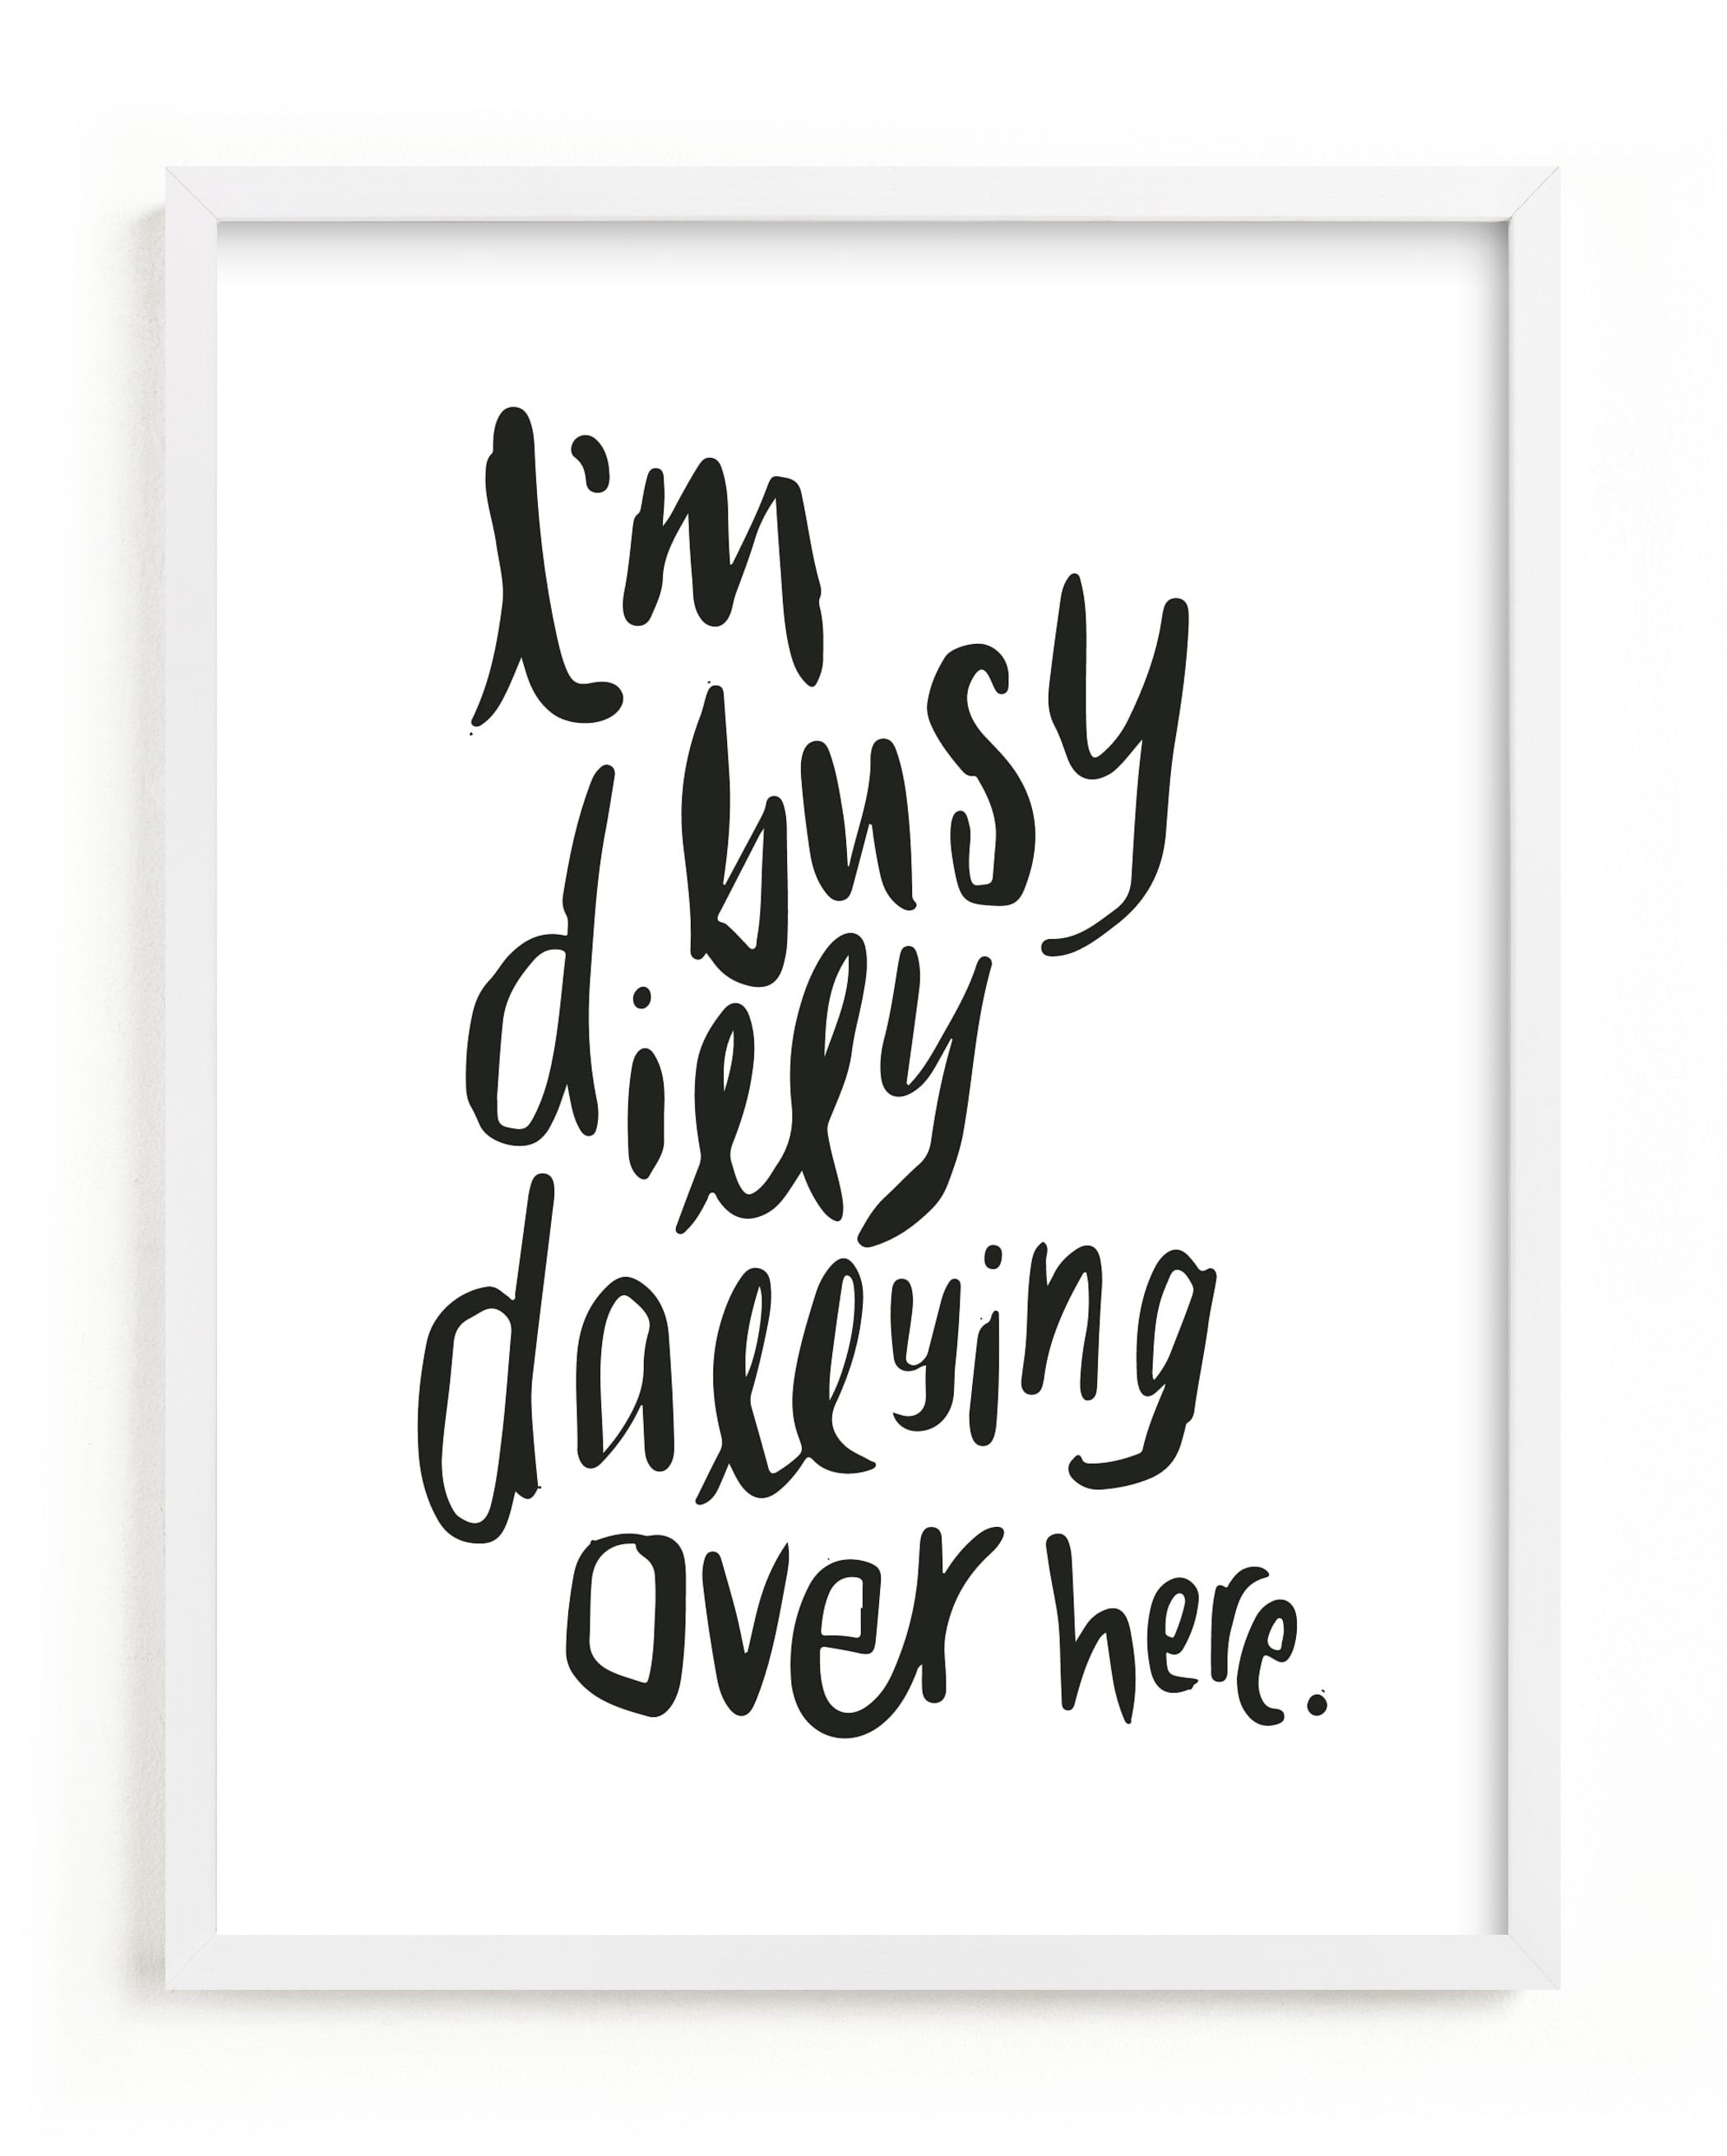 "Dillydally all day" - Graphic Limited Edition Art Print by Inkblot Design. | Minted